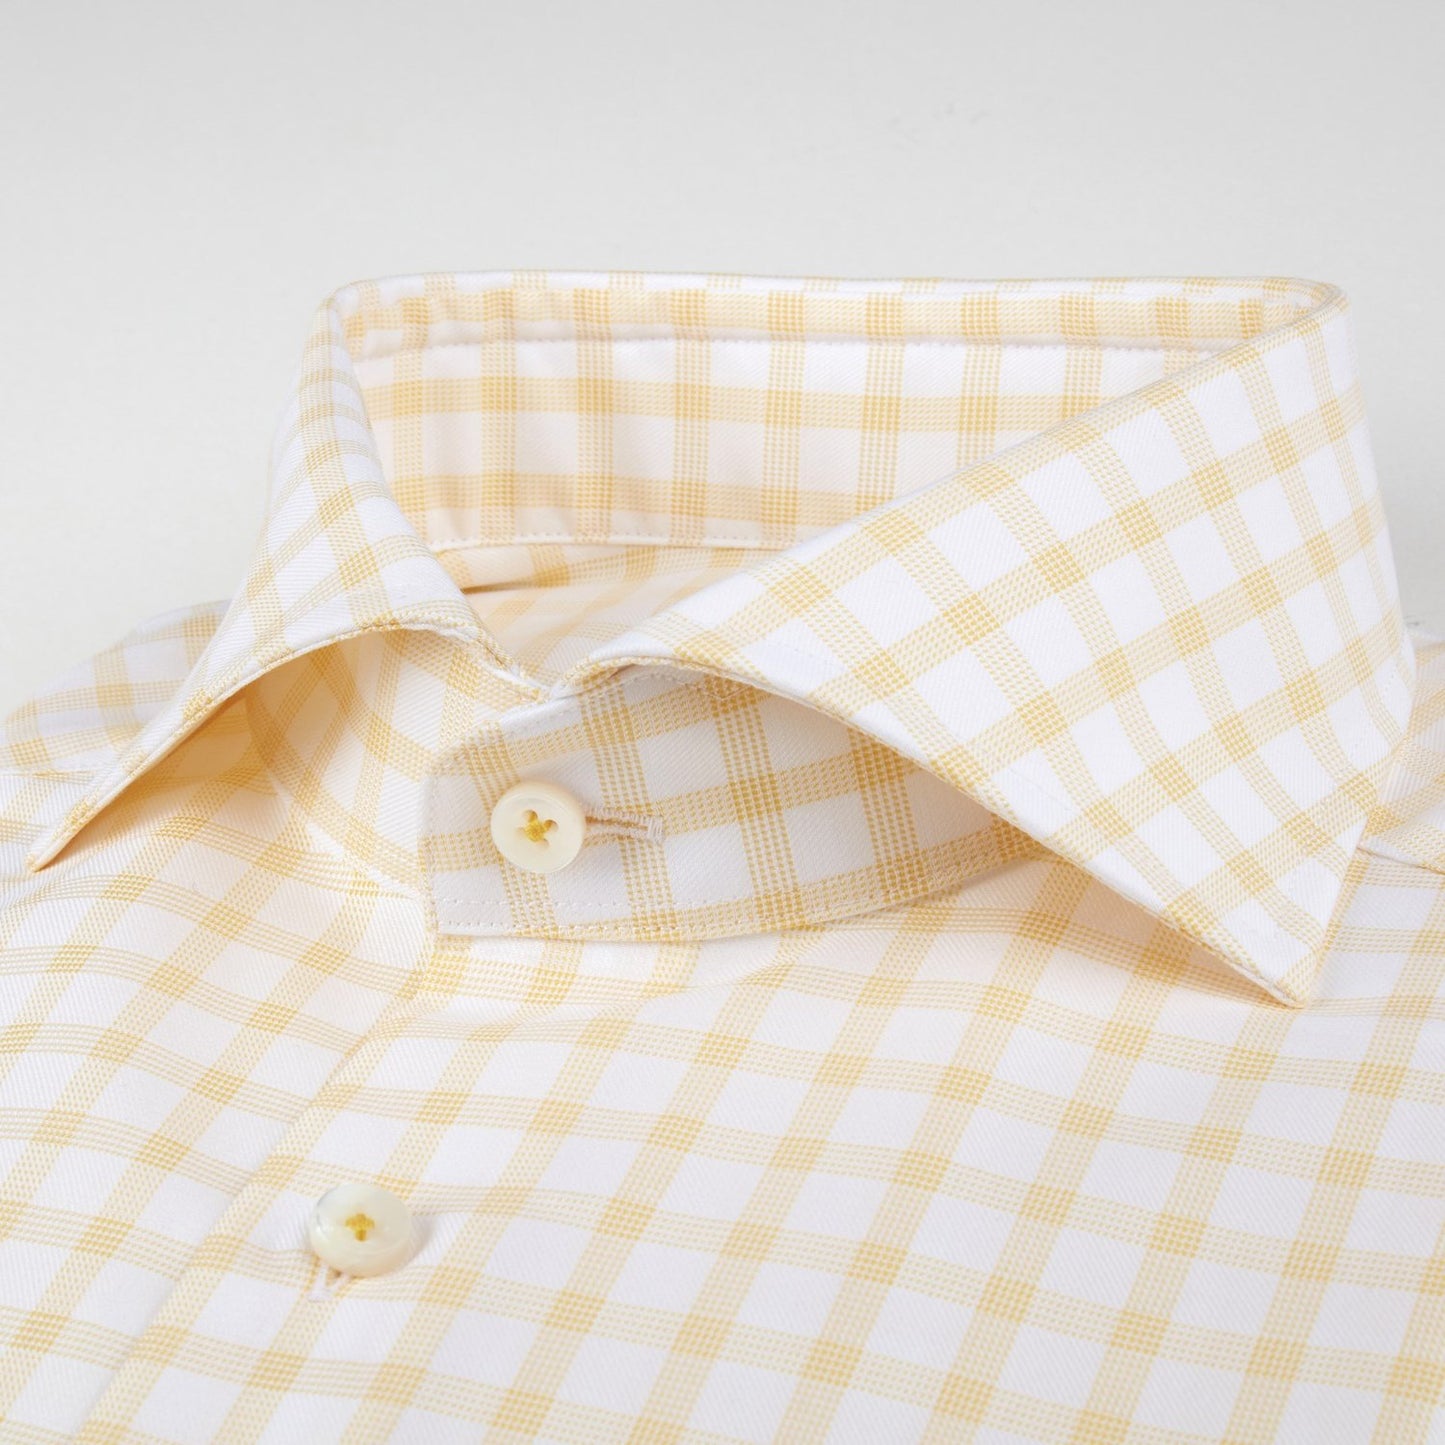 Stenströms Sport Shirt in Yellow and White Check Pattern